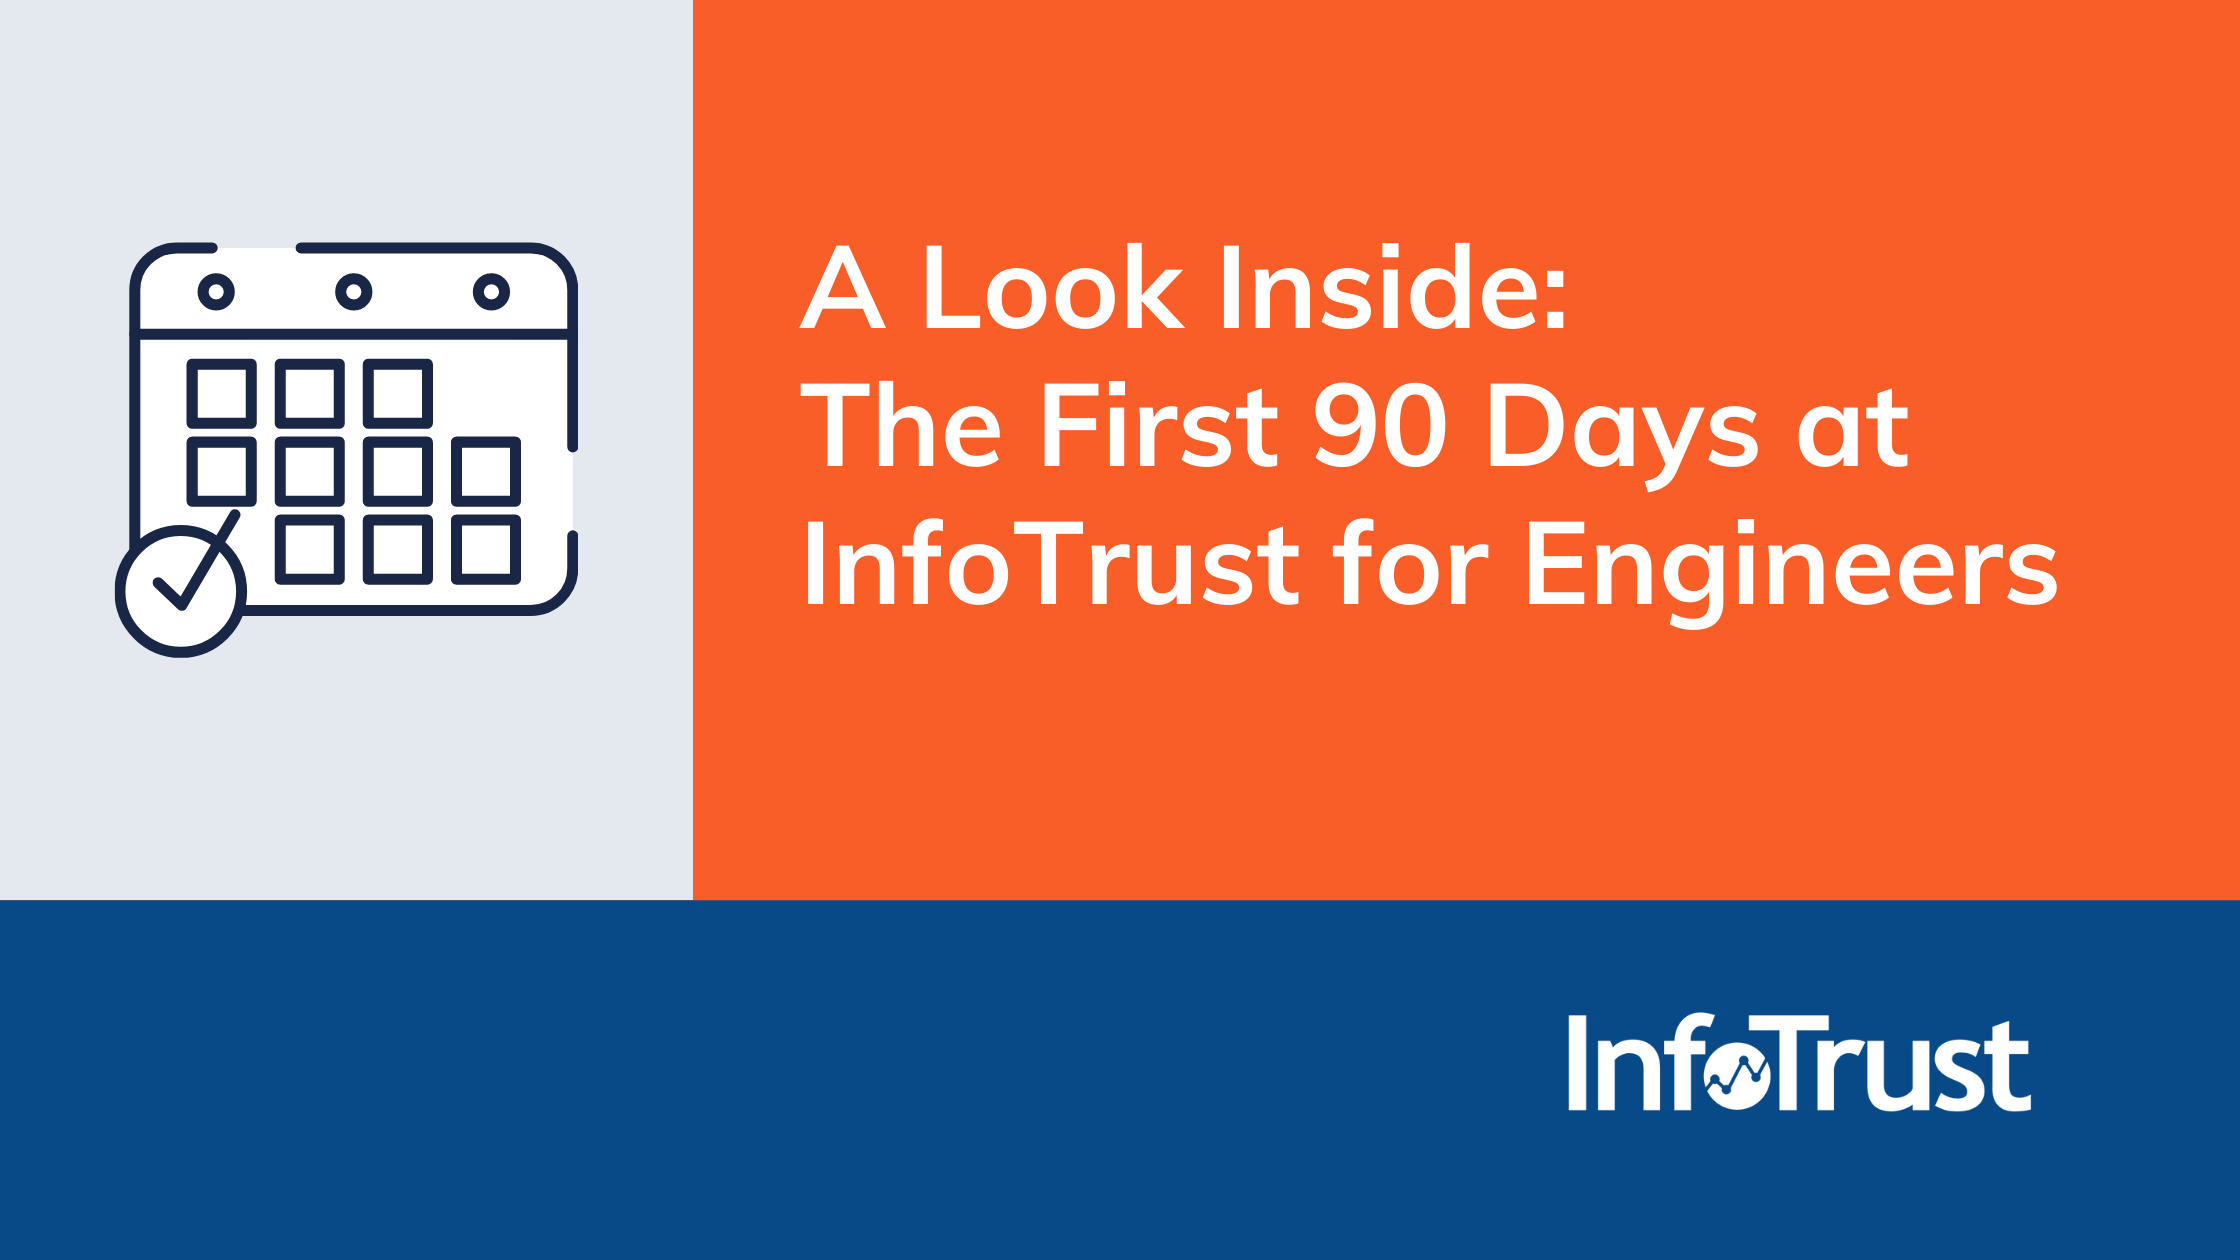 A Look Inside: The First 90 Days at InfoTrust for Engineers